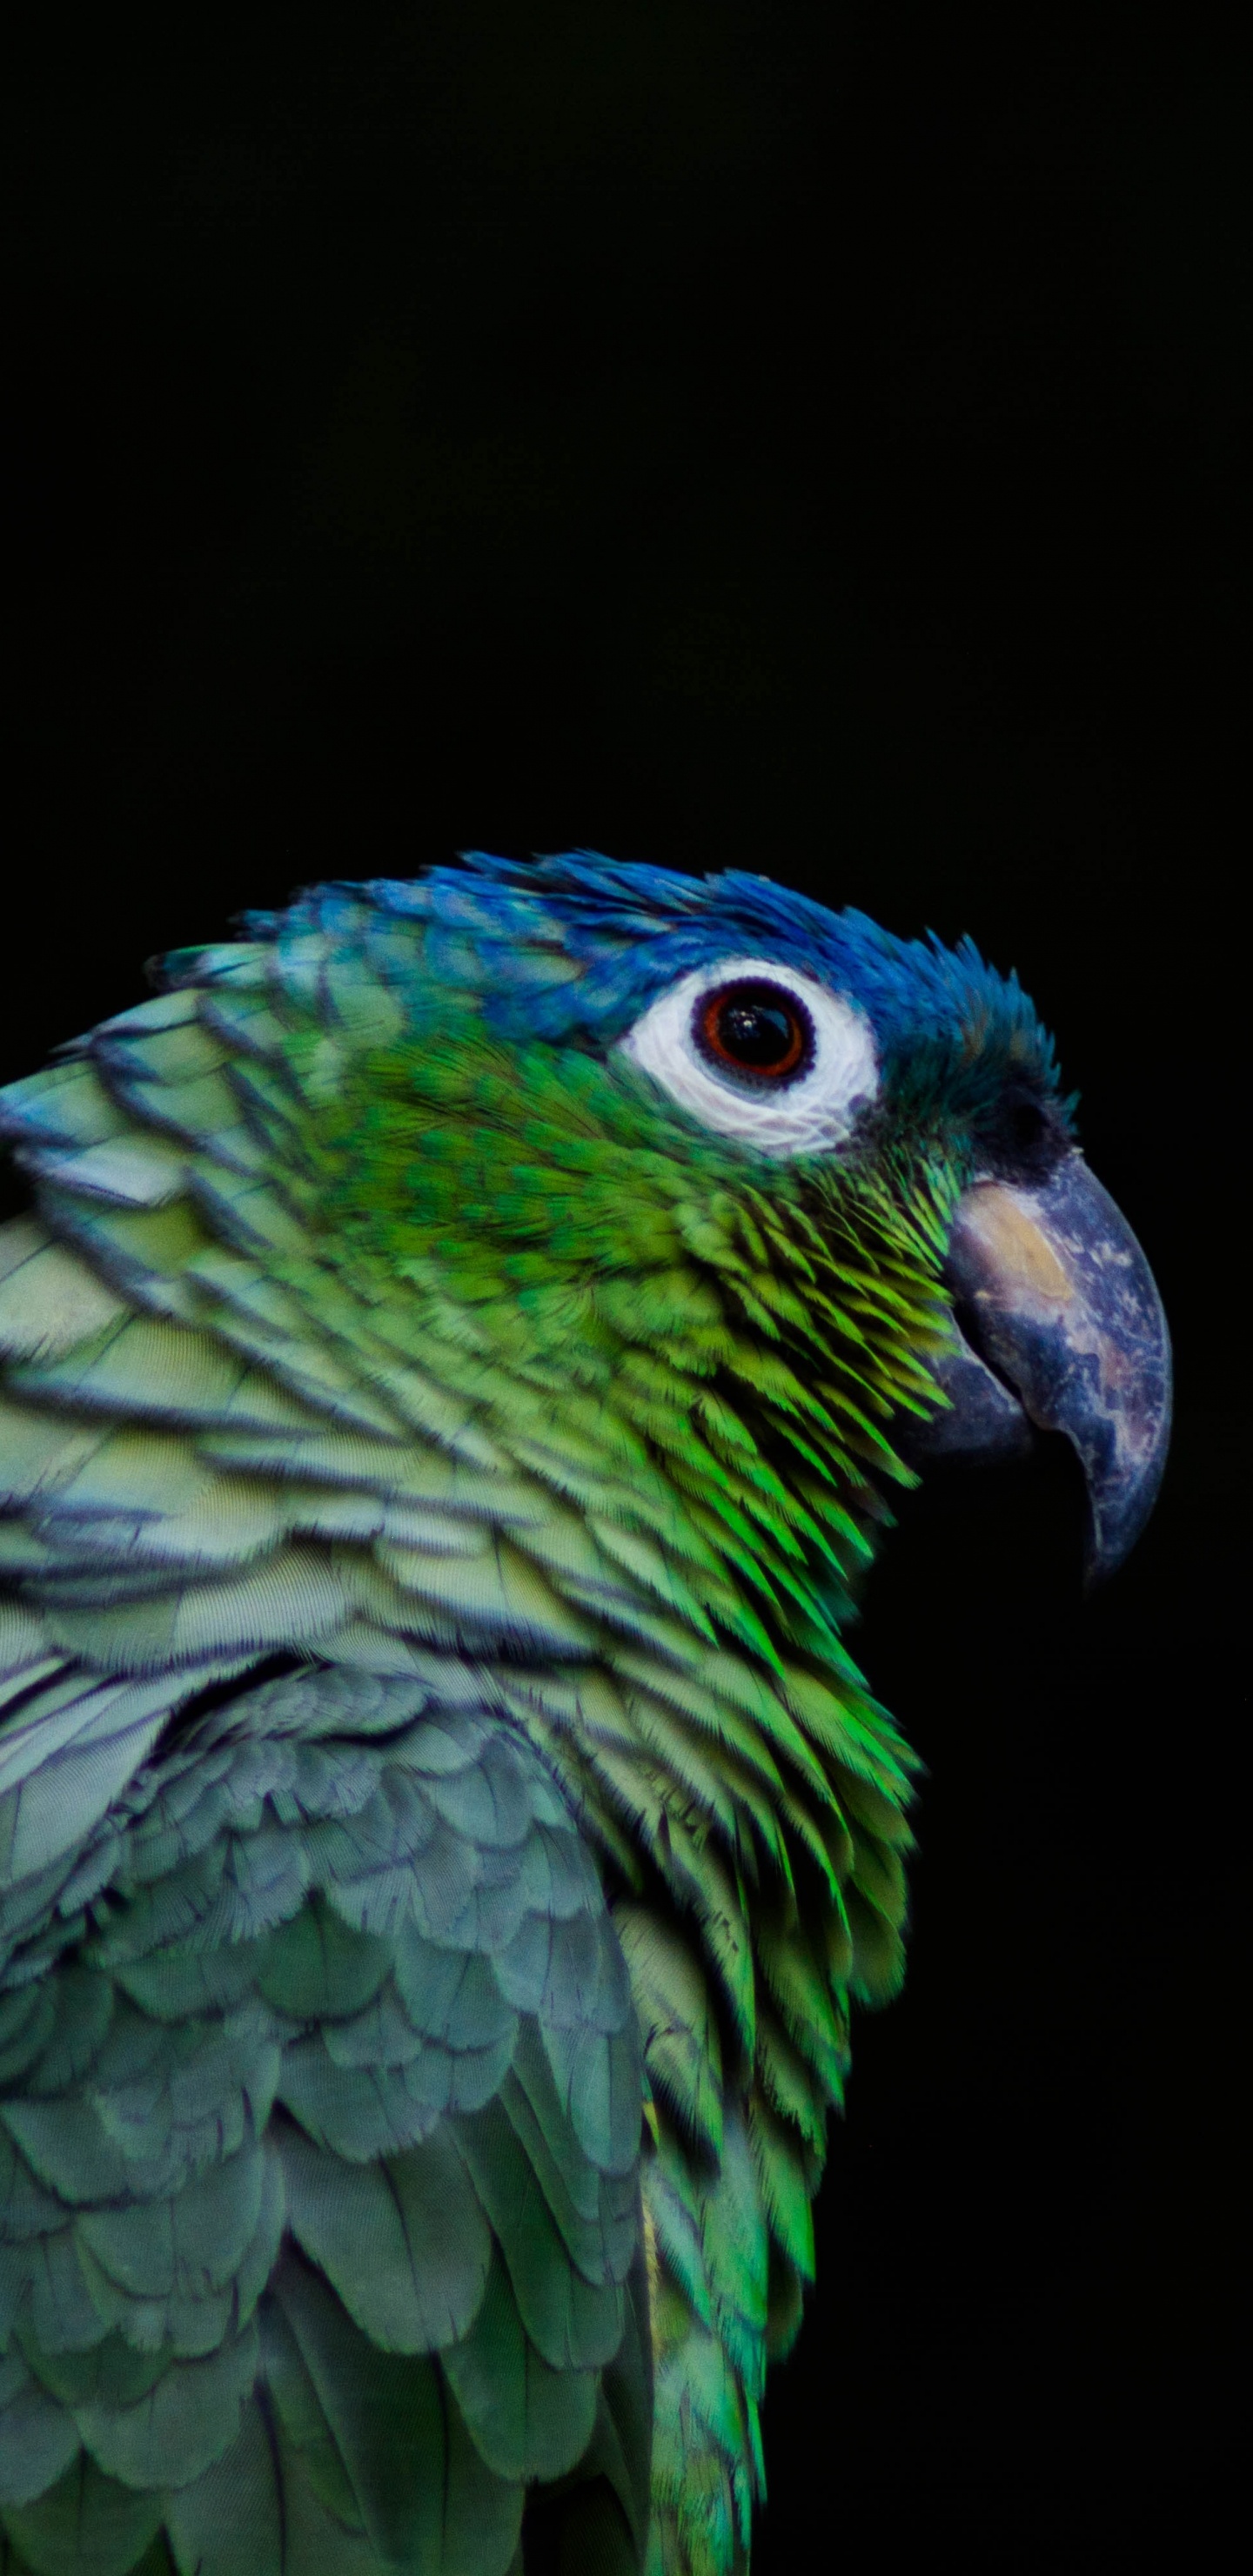 Green and Blue Parrot in Close up Photography. Wallpaper in 1440x2960 Resolution